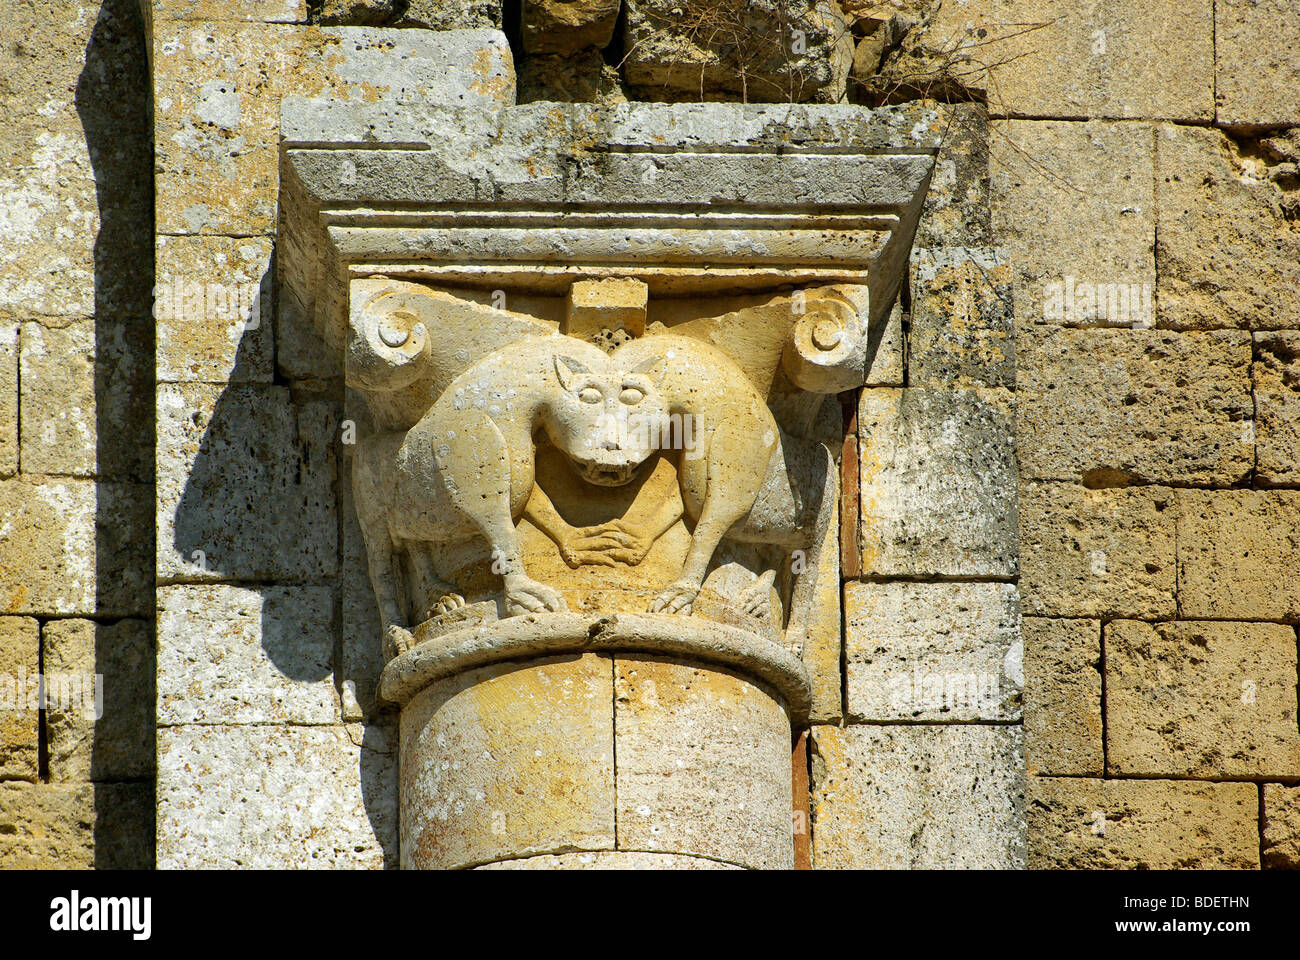 St. Antimo's Abbey or Abbazia di Sant'Antimo, Carved stone capital of strange co joined animals Stock Photo